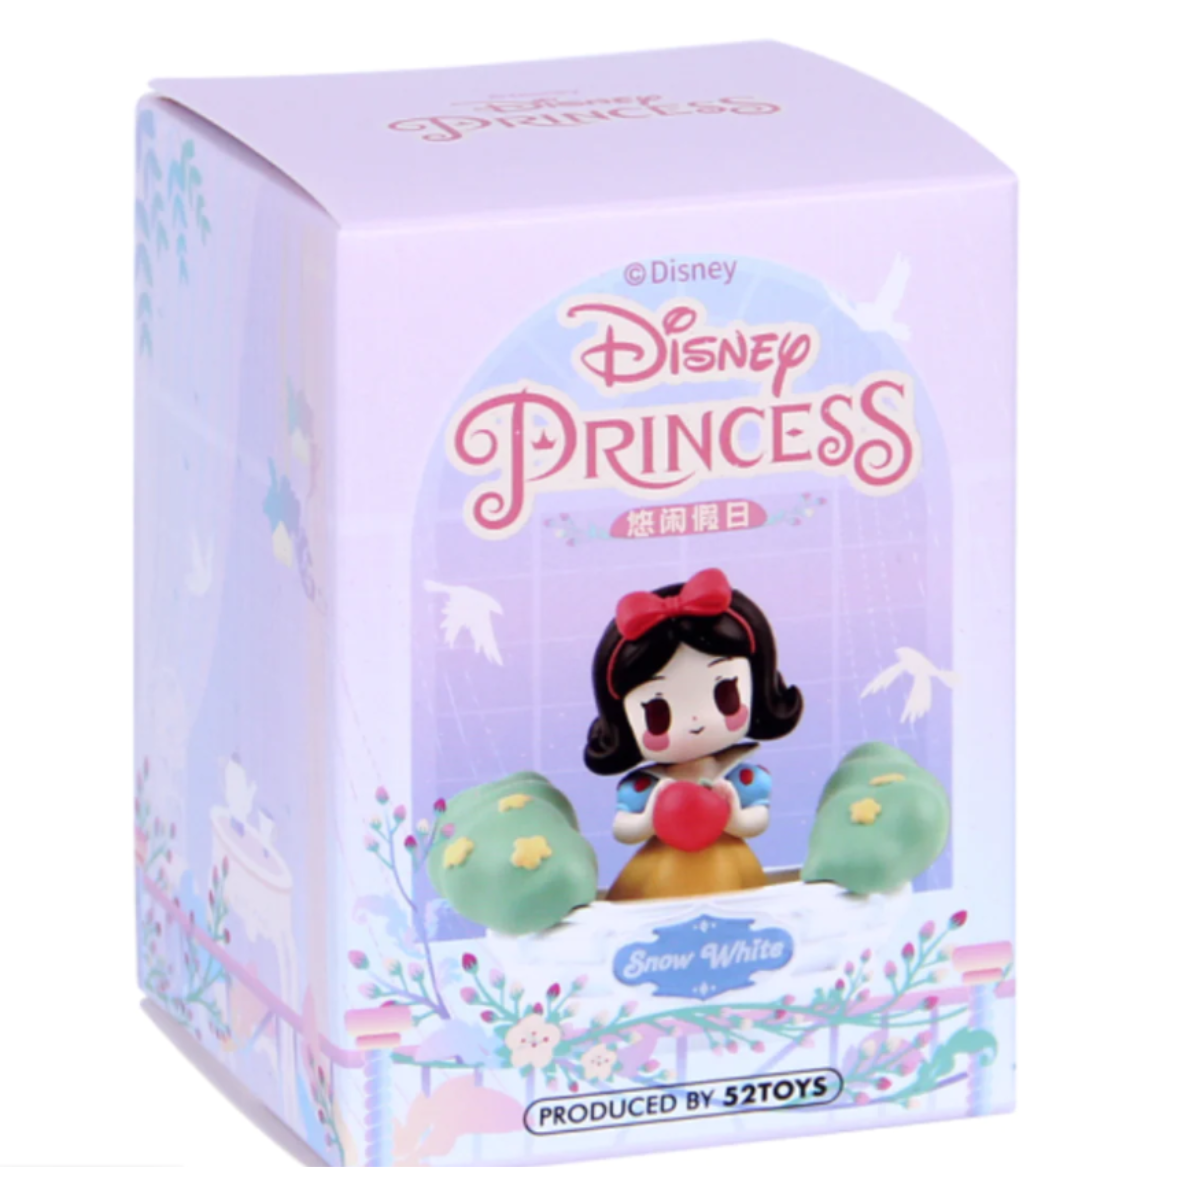 52Toys Disney Series Blind Box-Princess Carousel-52Toys-Ace Cards & Collectibles